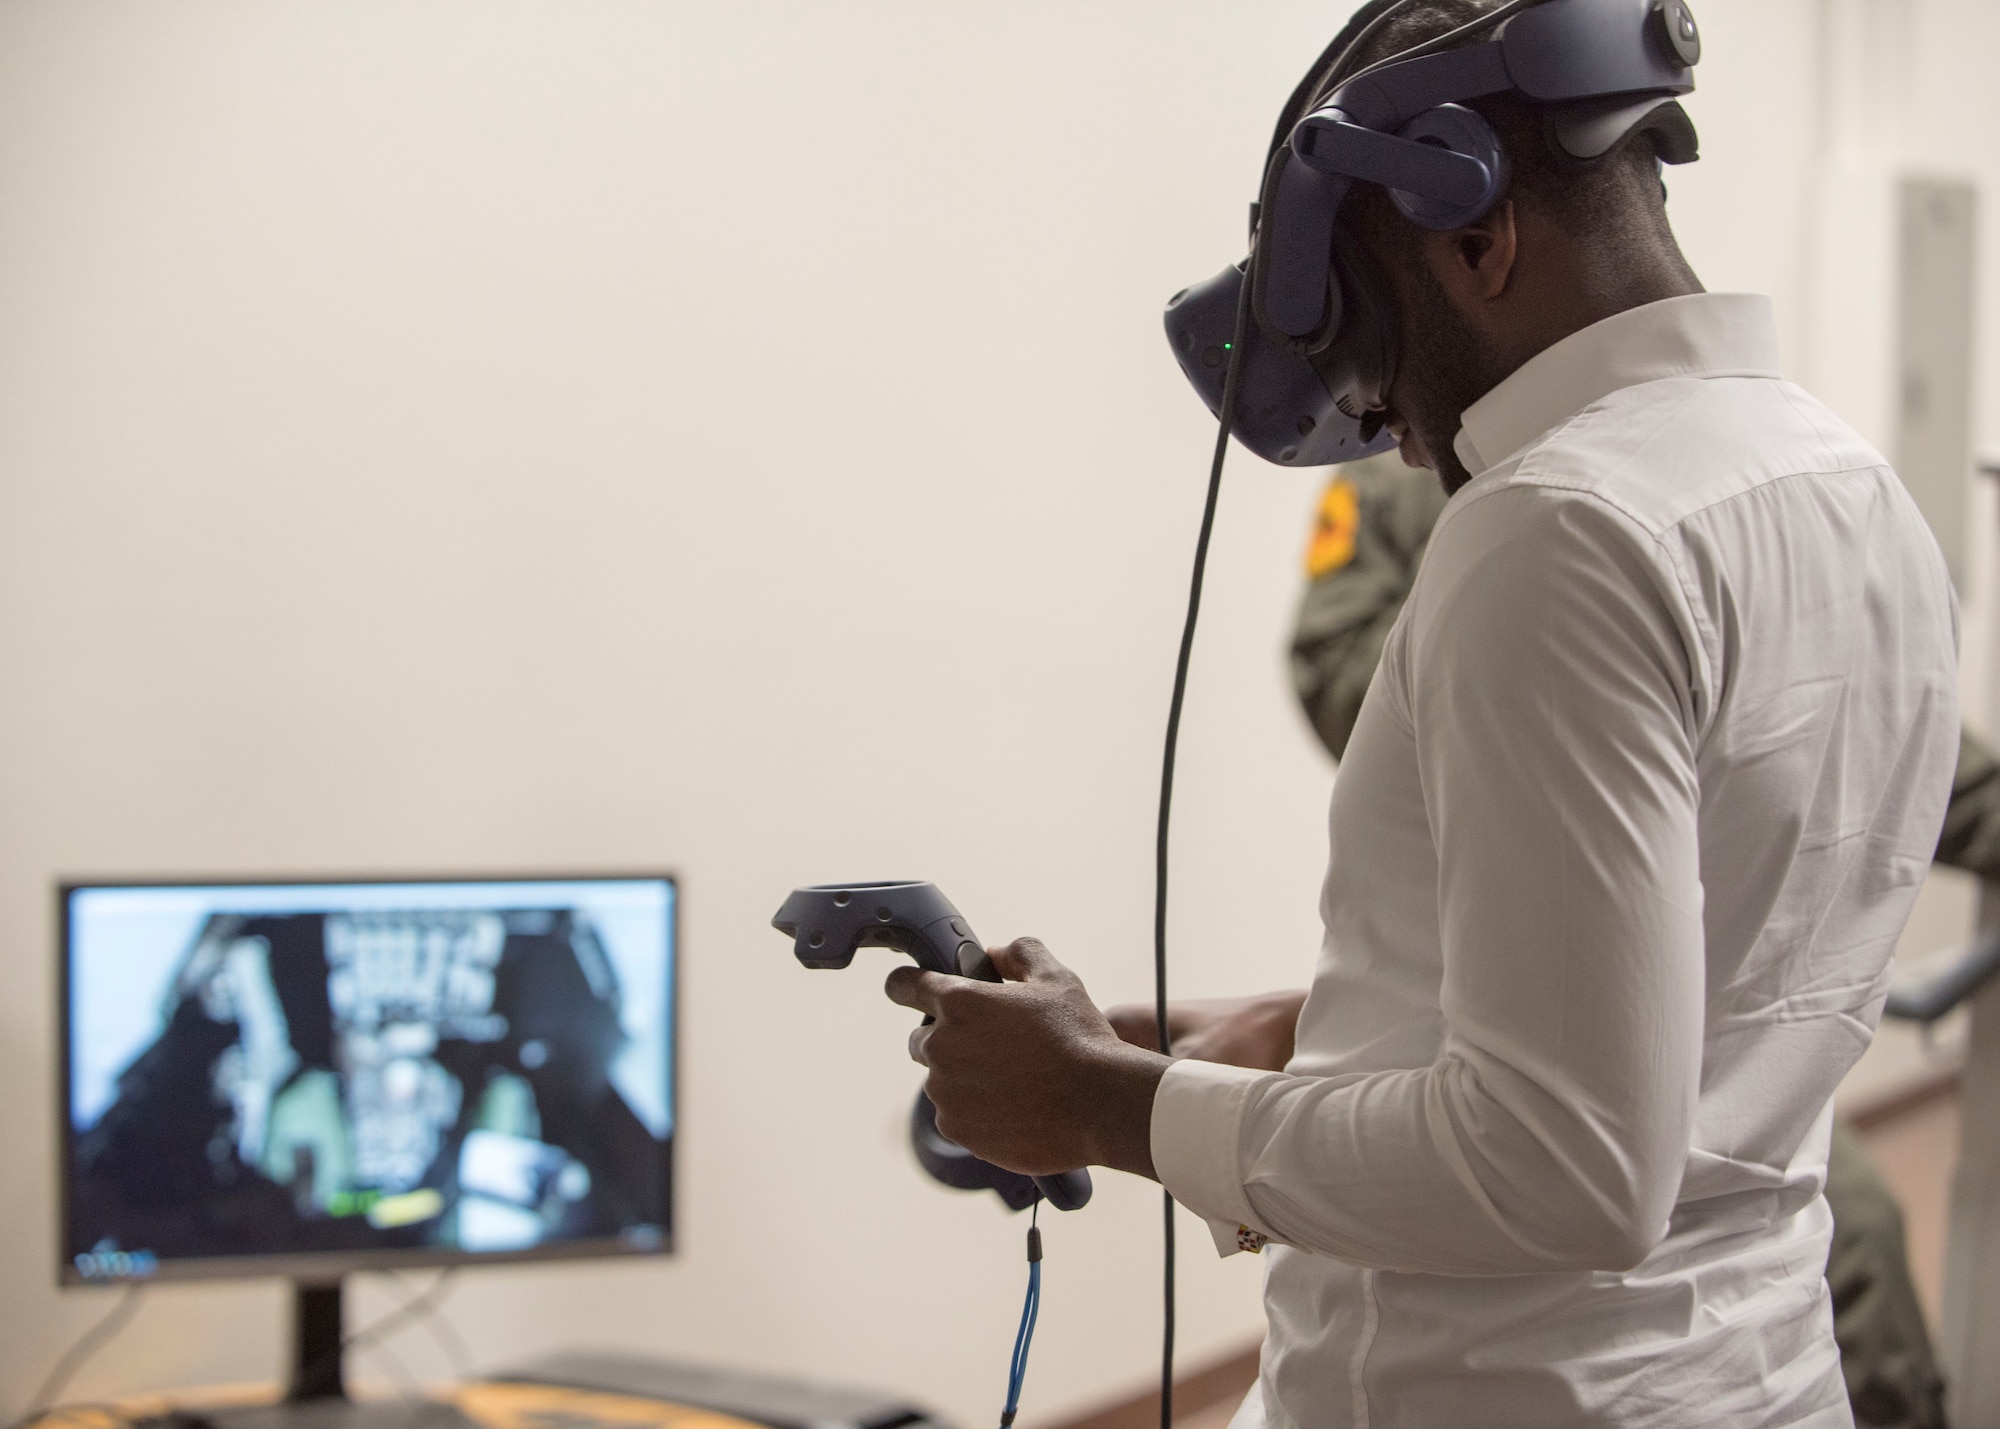 Yves Zamar, congressional staff representative for Congresswoman Deb Haaland, tries out virtual reality equipment, Oct. 2, 2019, on Holloman Air Force Base, N.M. The 8th Fighter Squadron is in the process of implementing VR into their training environment. (U.S. Air Force photo by Staff Sgt. Christine Groening)